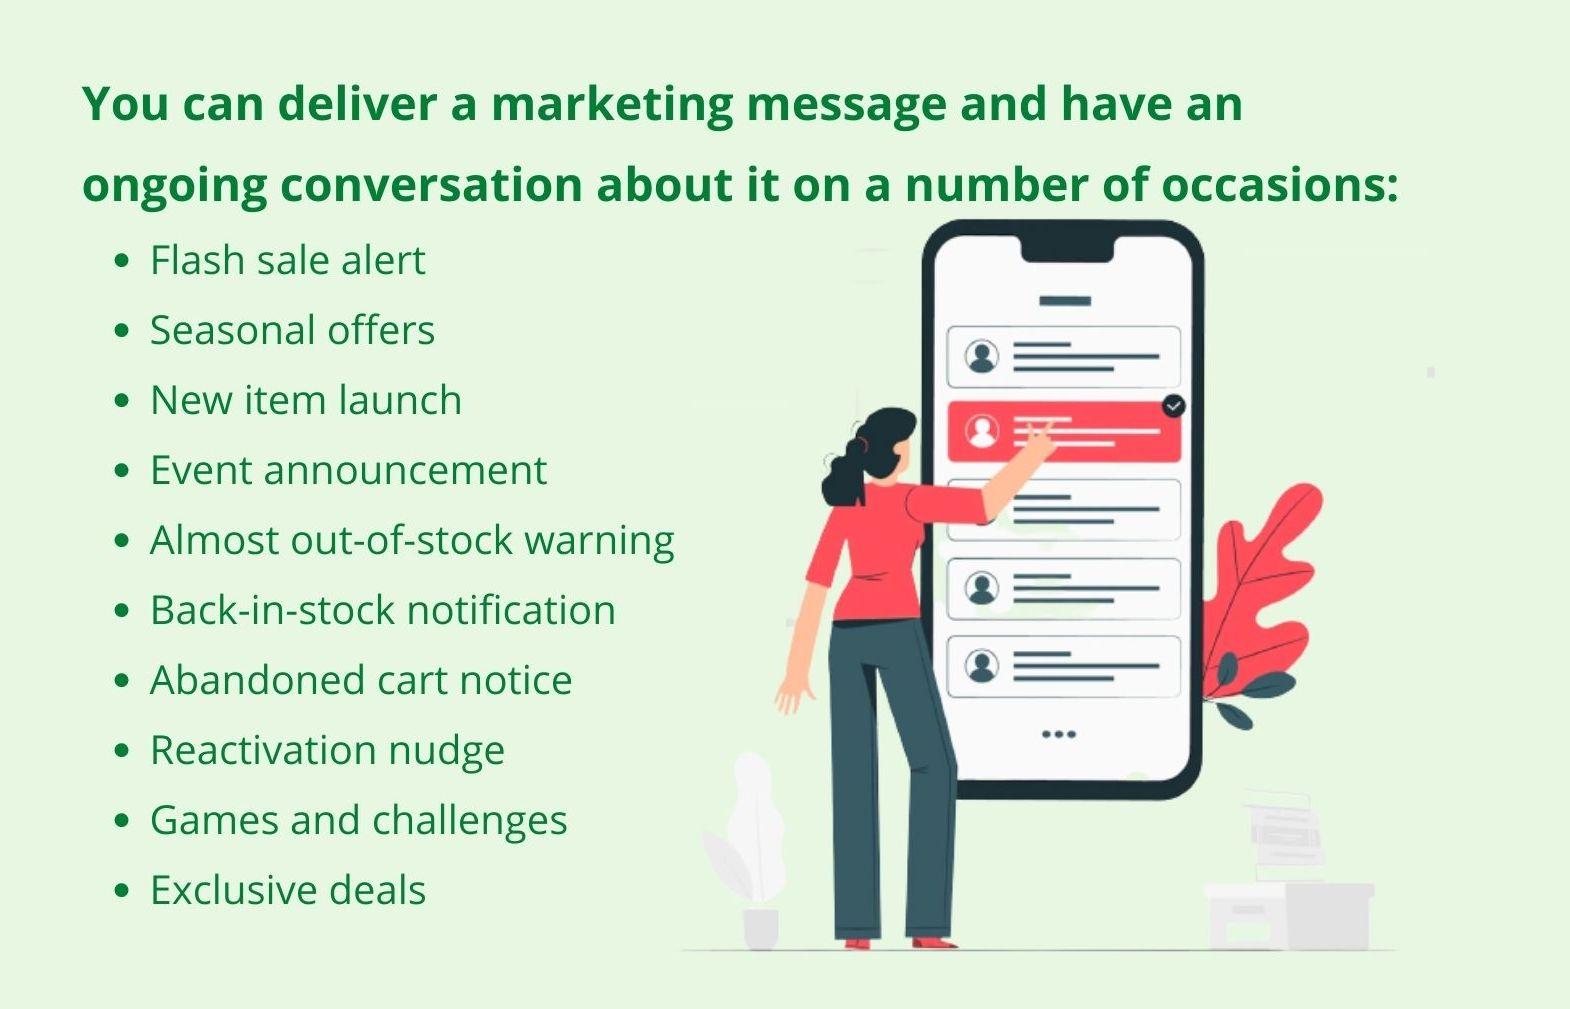 You can deliver a marketing message and have an ongoing conversation about it on a number of occasions: Flash sale alerts, Seasonal offers, New item launches, Event announcements, Almost out-of-stock warnings, Back-in-stock notifications, Abandoned cart notices, Reactivation nudge, Games and challenges, Exclusive deals